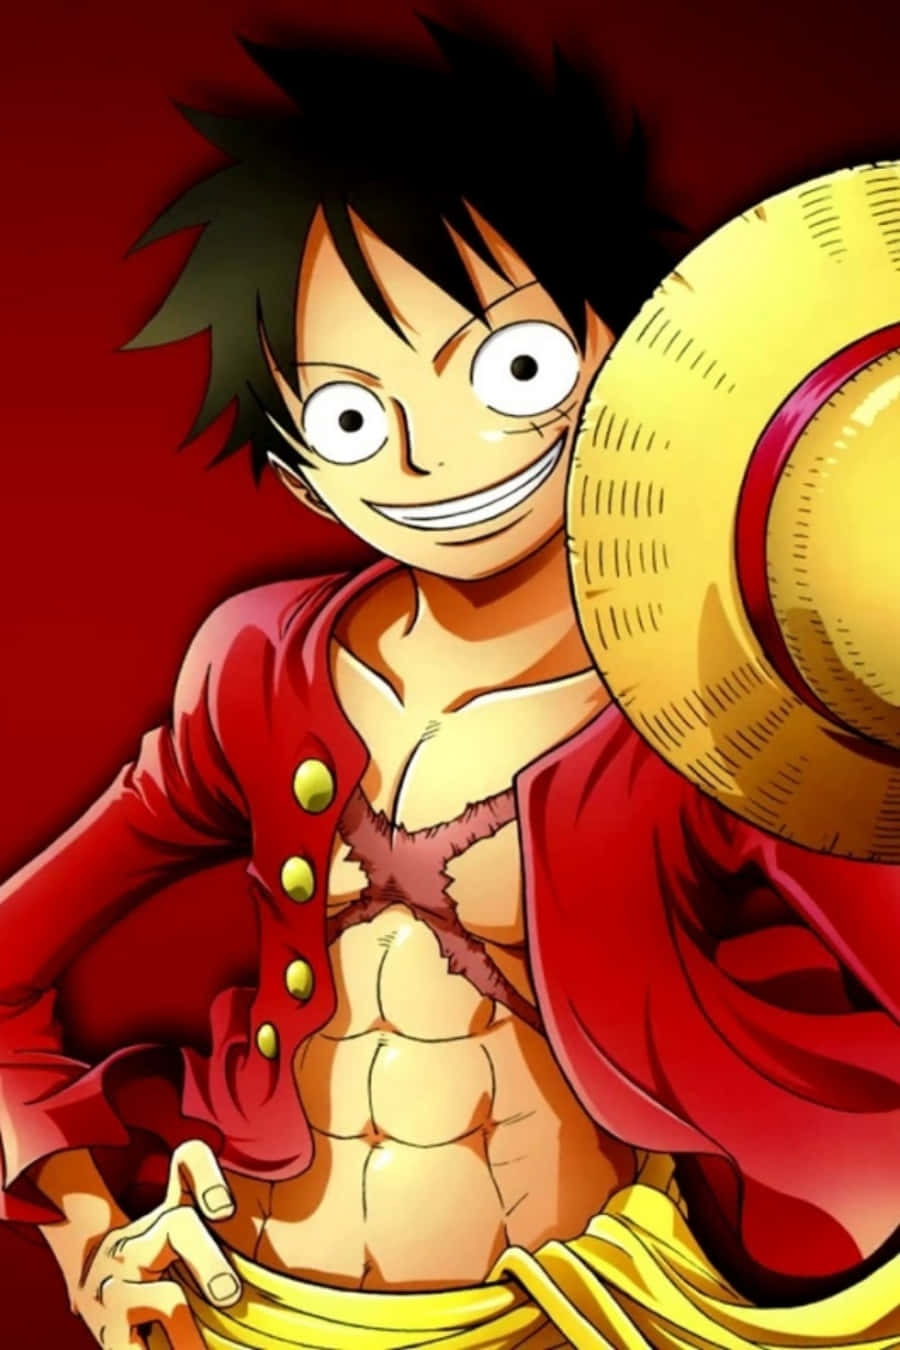 Luffy in action, showcasing his extraordinary powers on the phone wallpaper. Wallpaper